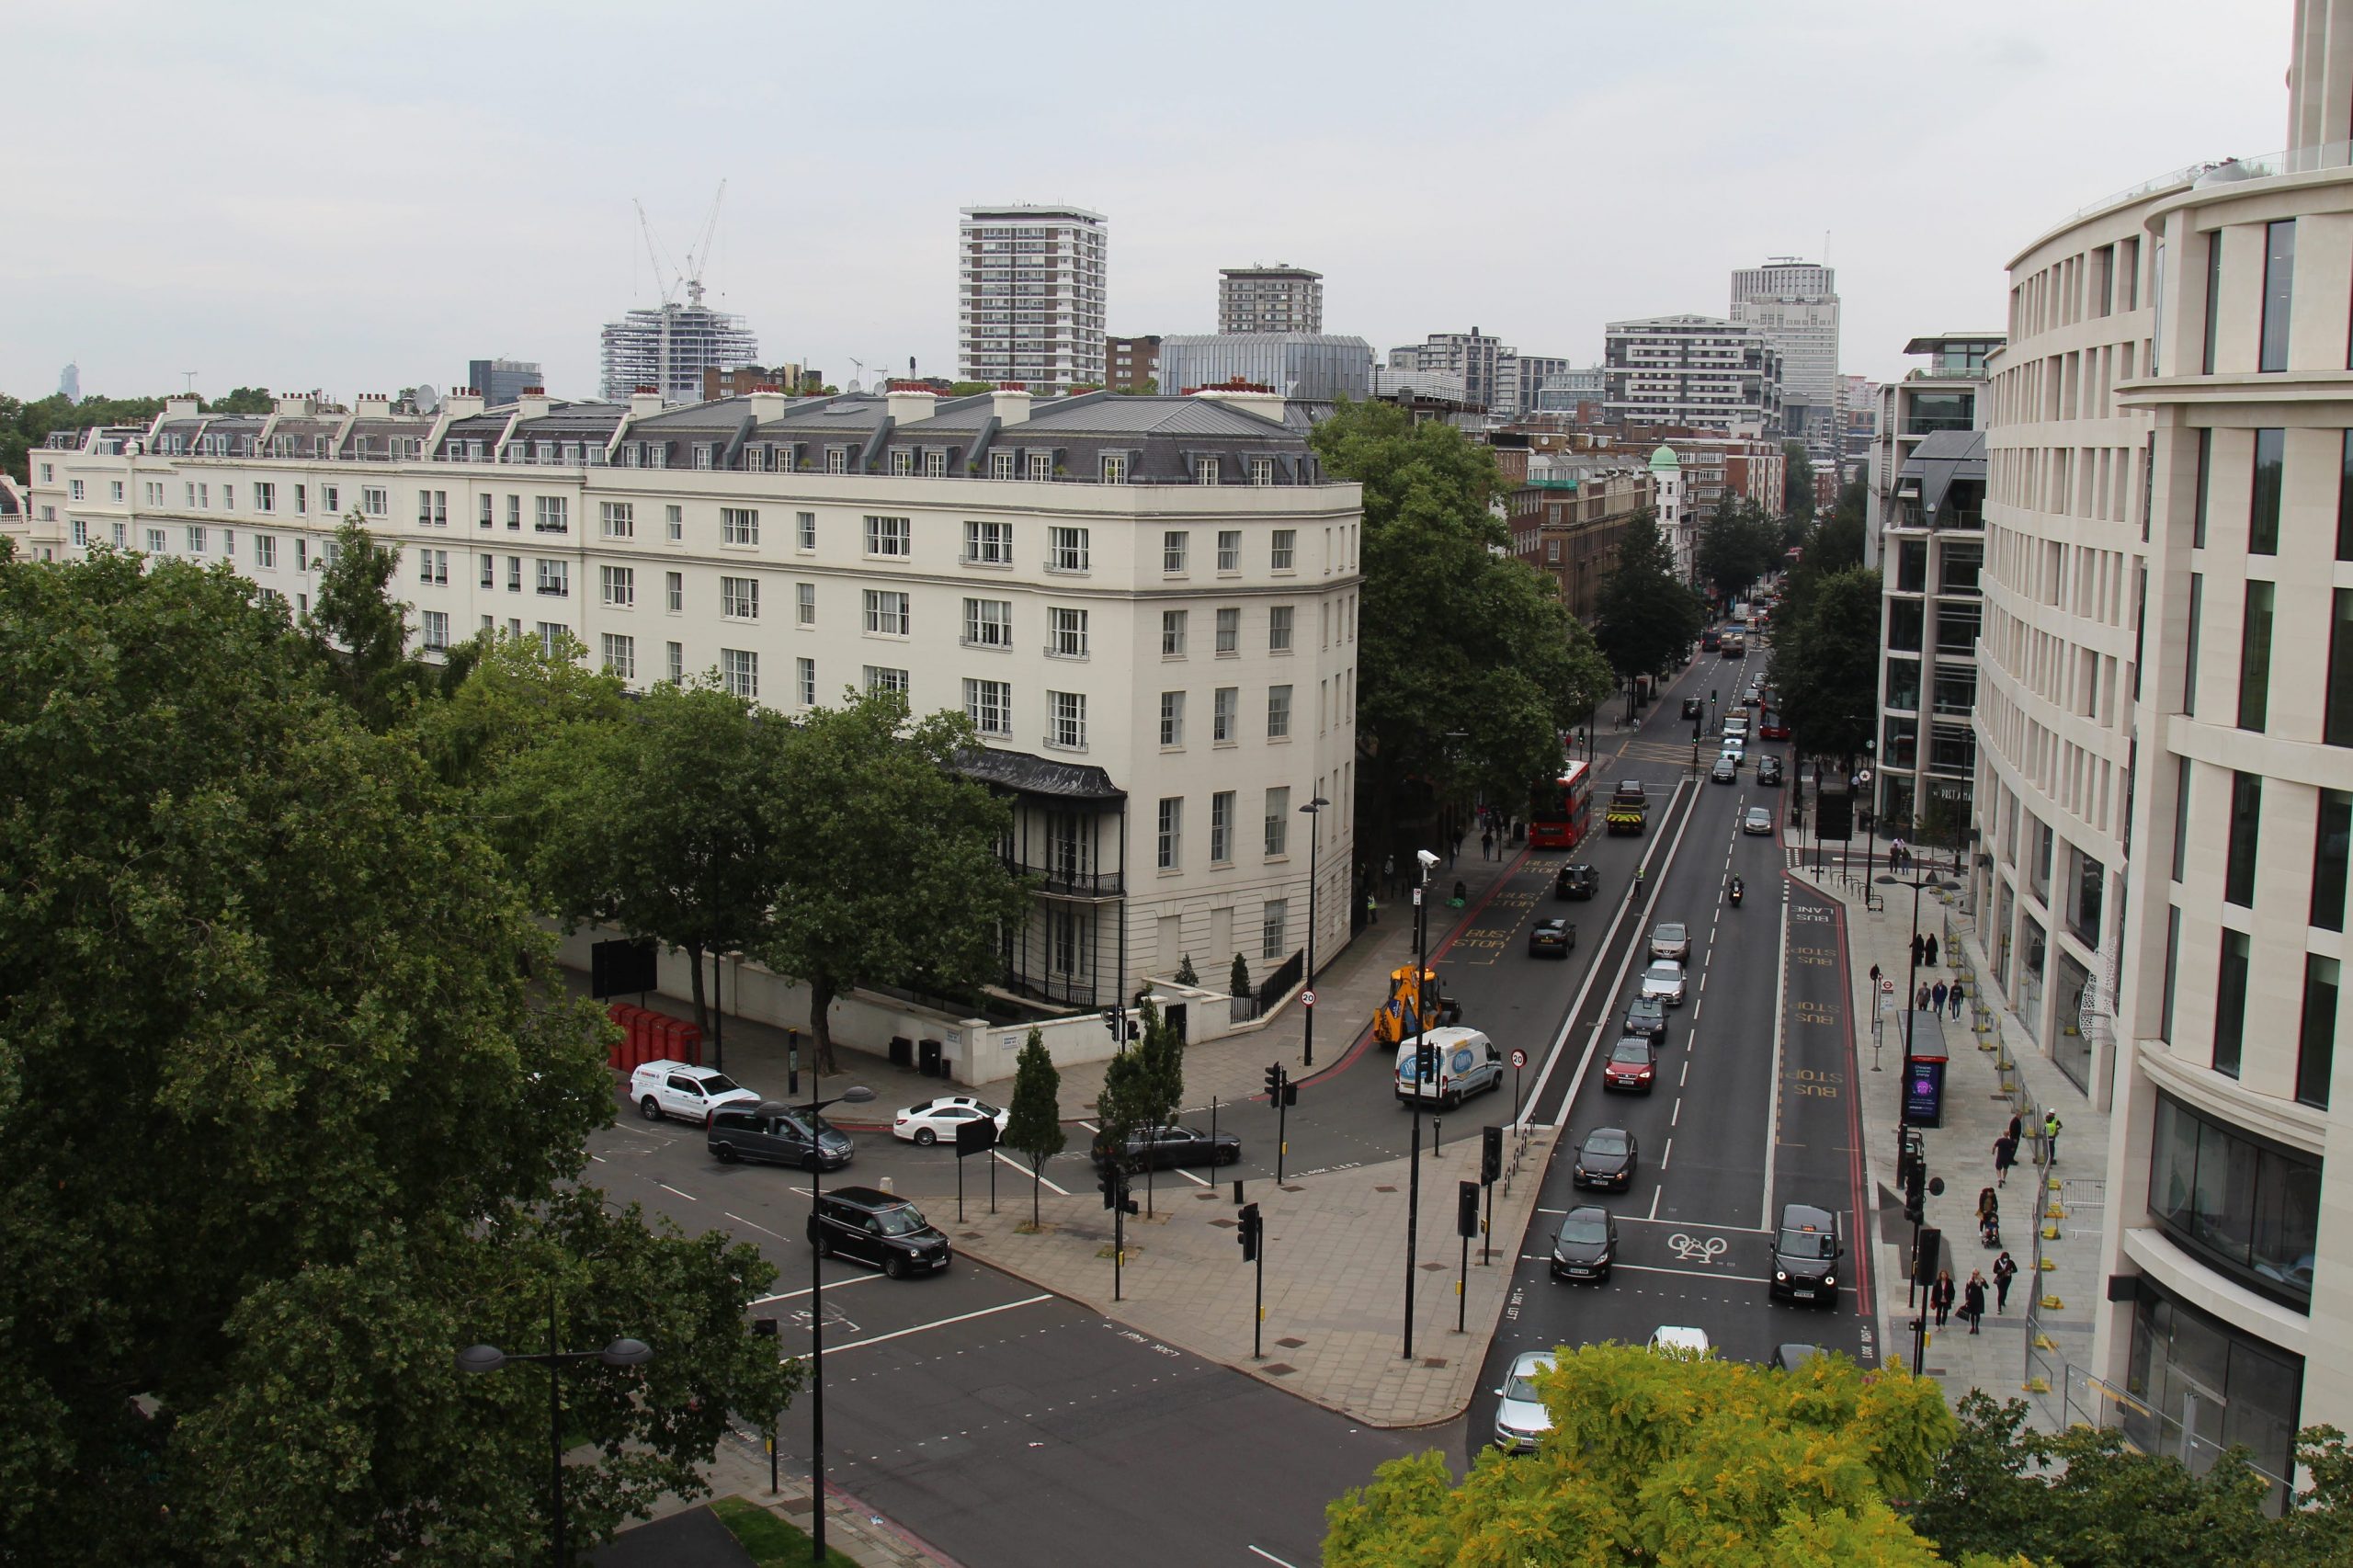 A collection of white buildings in London's busy city center with thick green trees lining the sides of the roads.